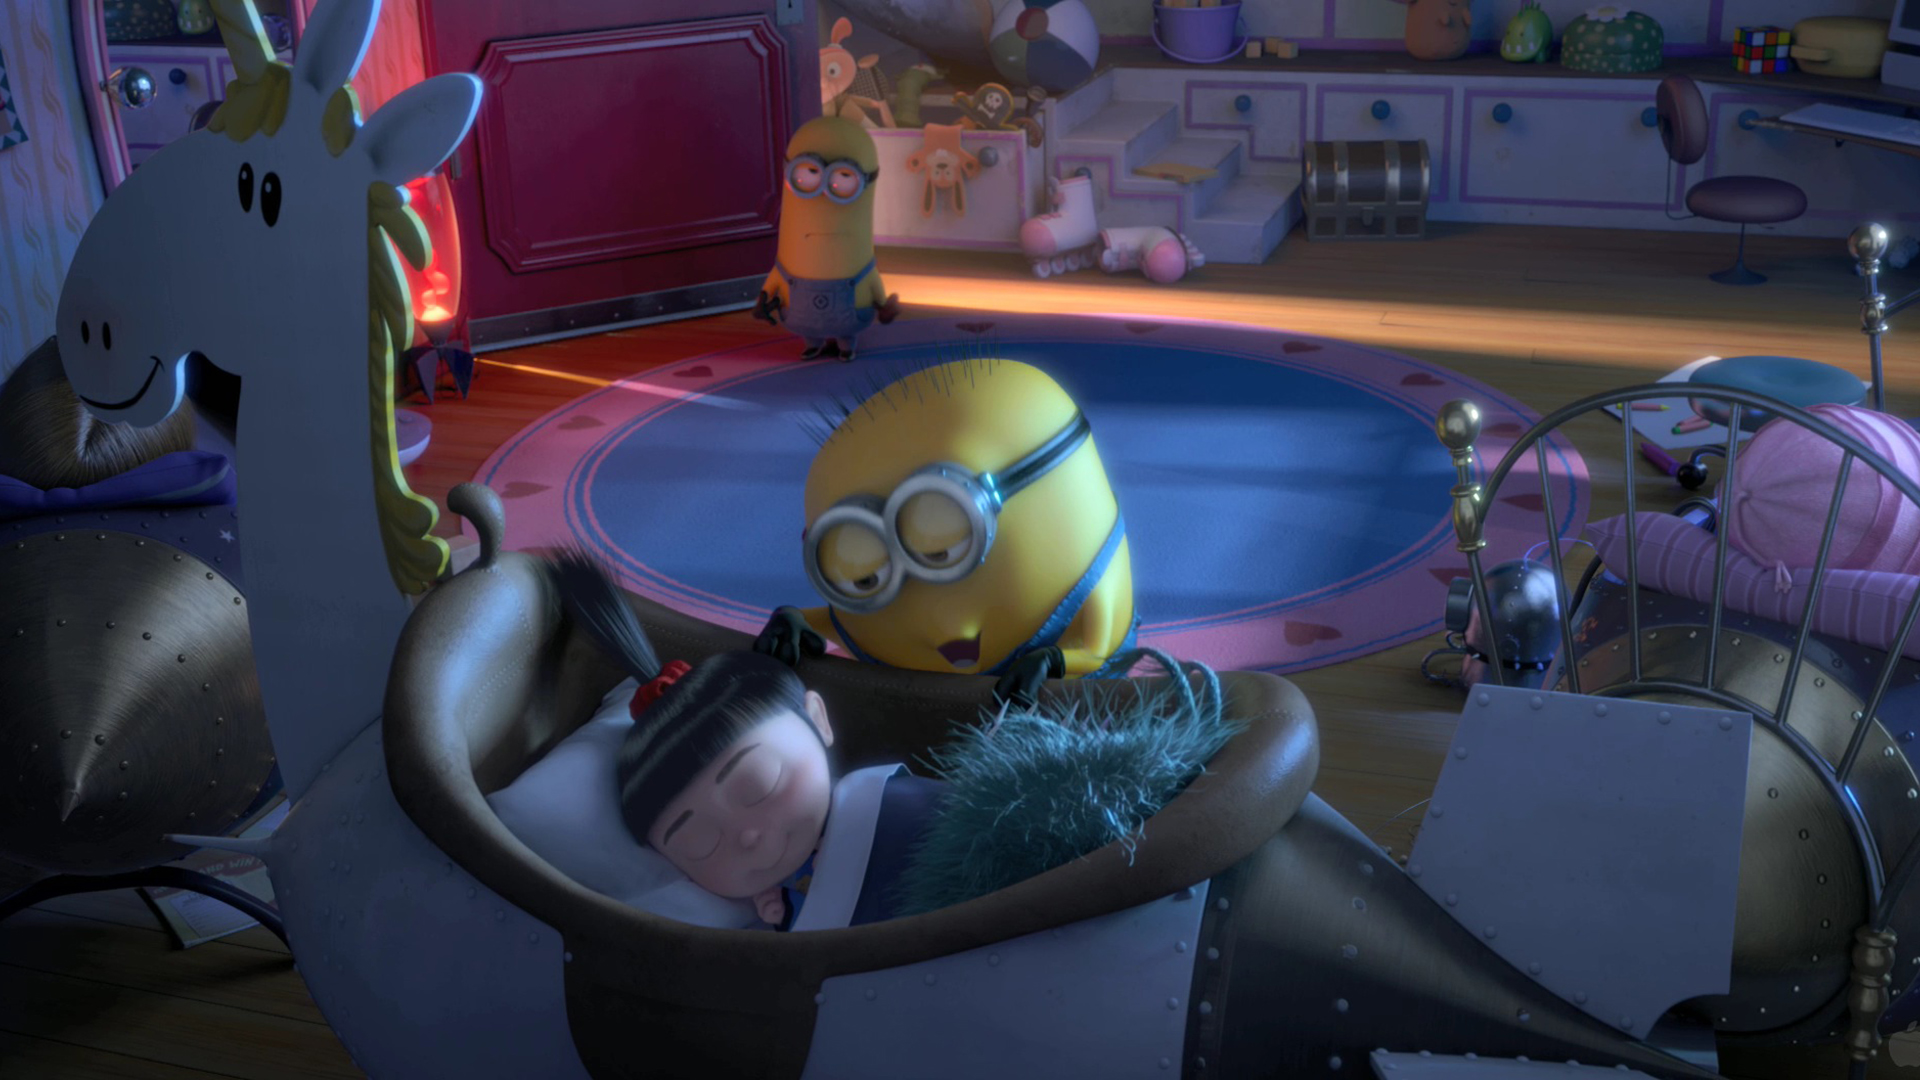 for ipod download Despicable Me 2